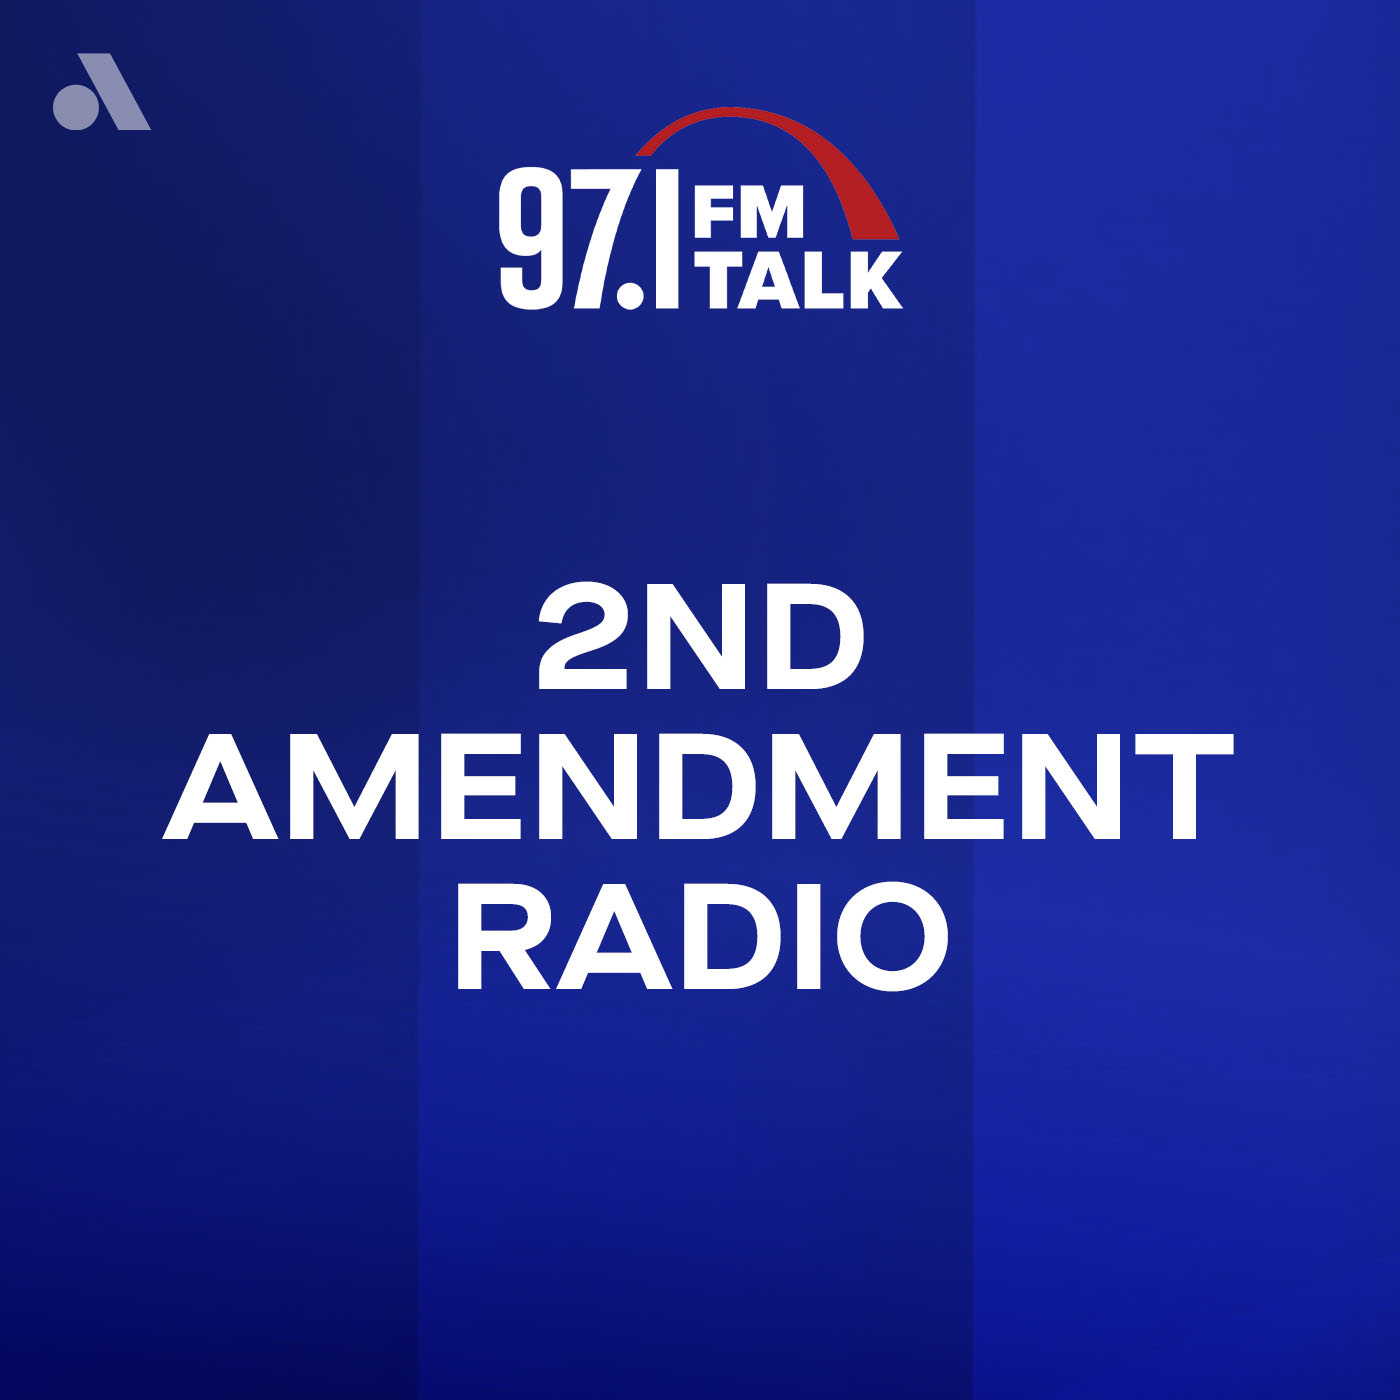 2nd Amendment Radio & The Great Outdoors 3-6-21 podcast